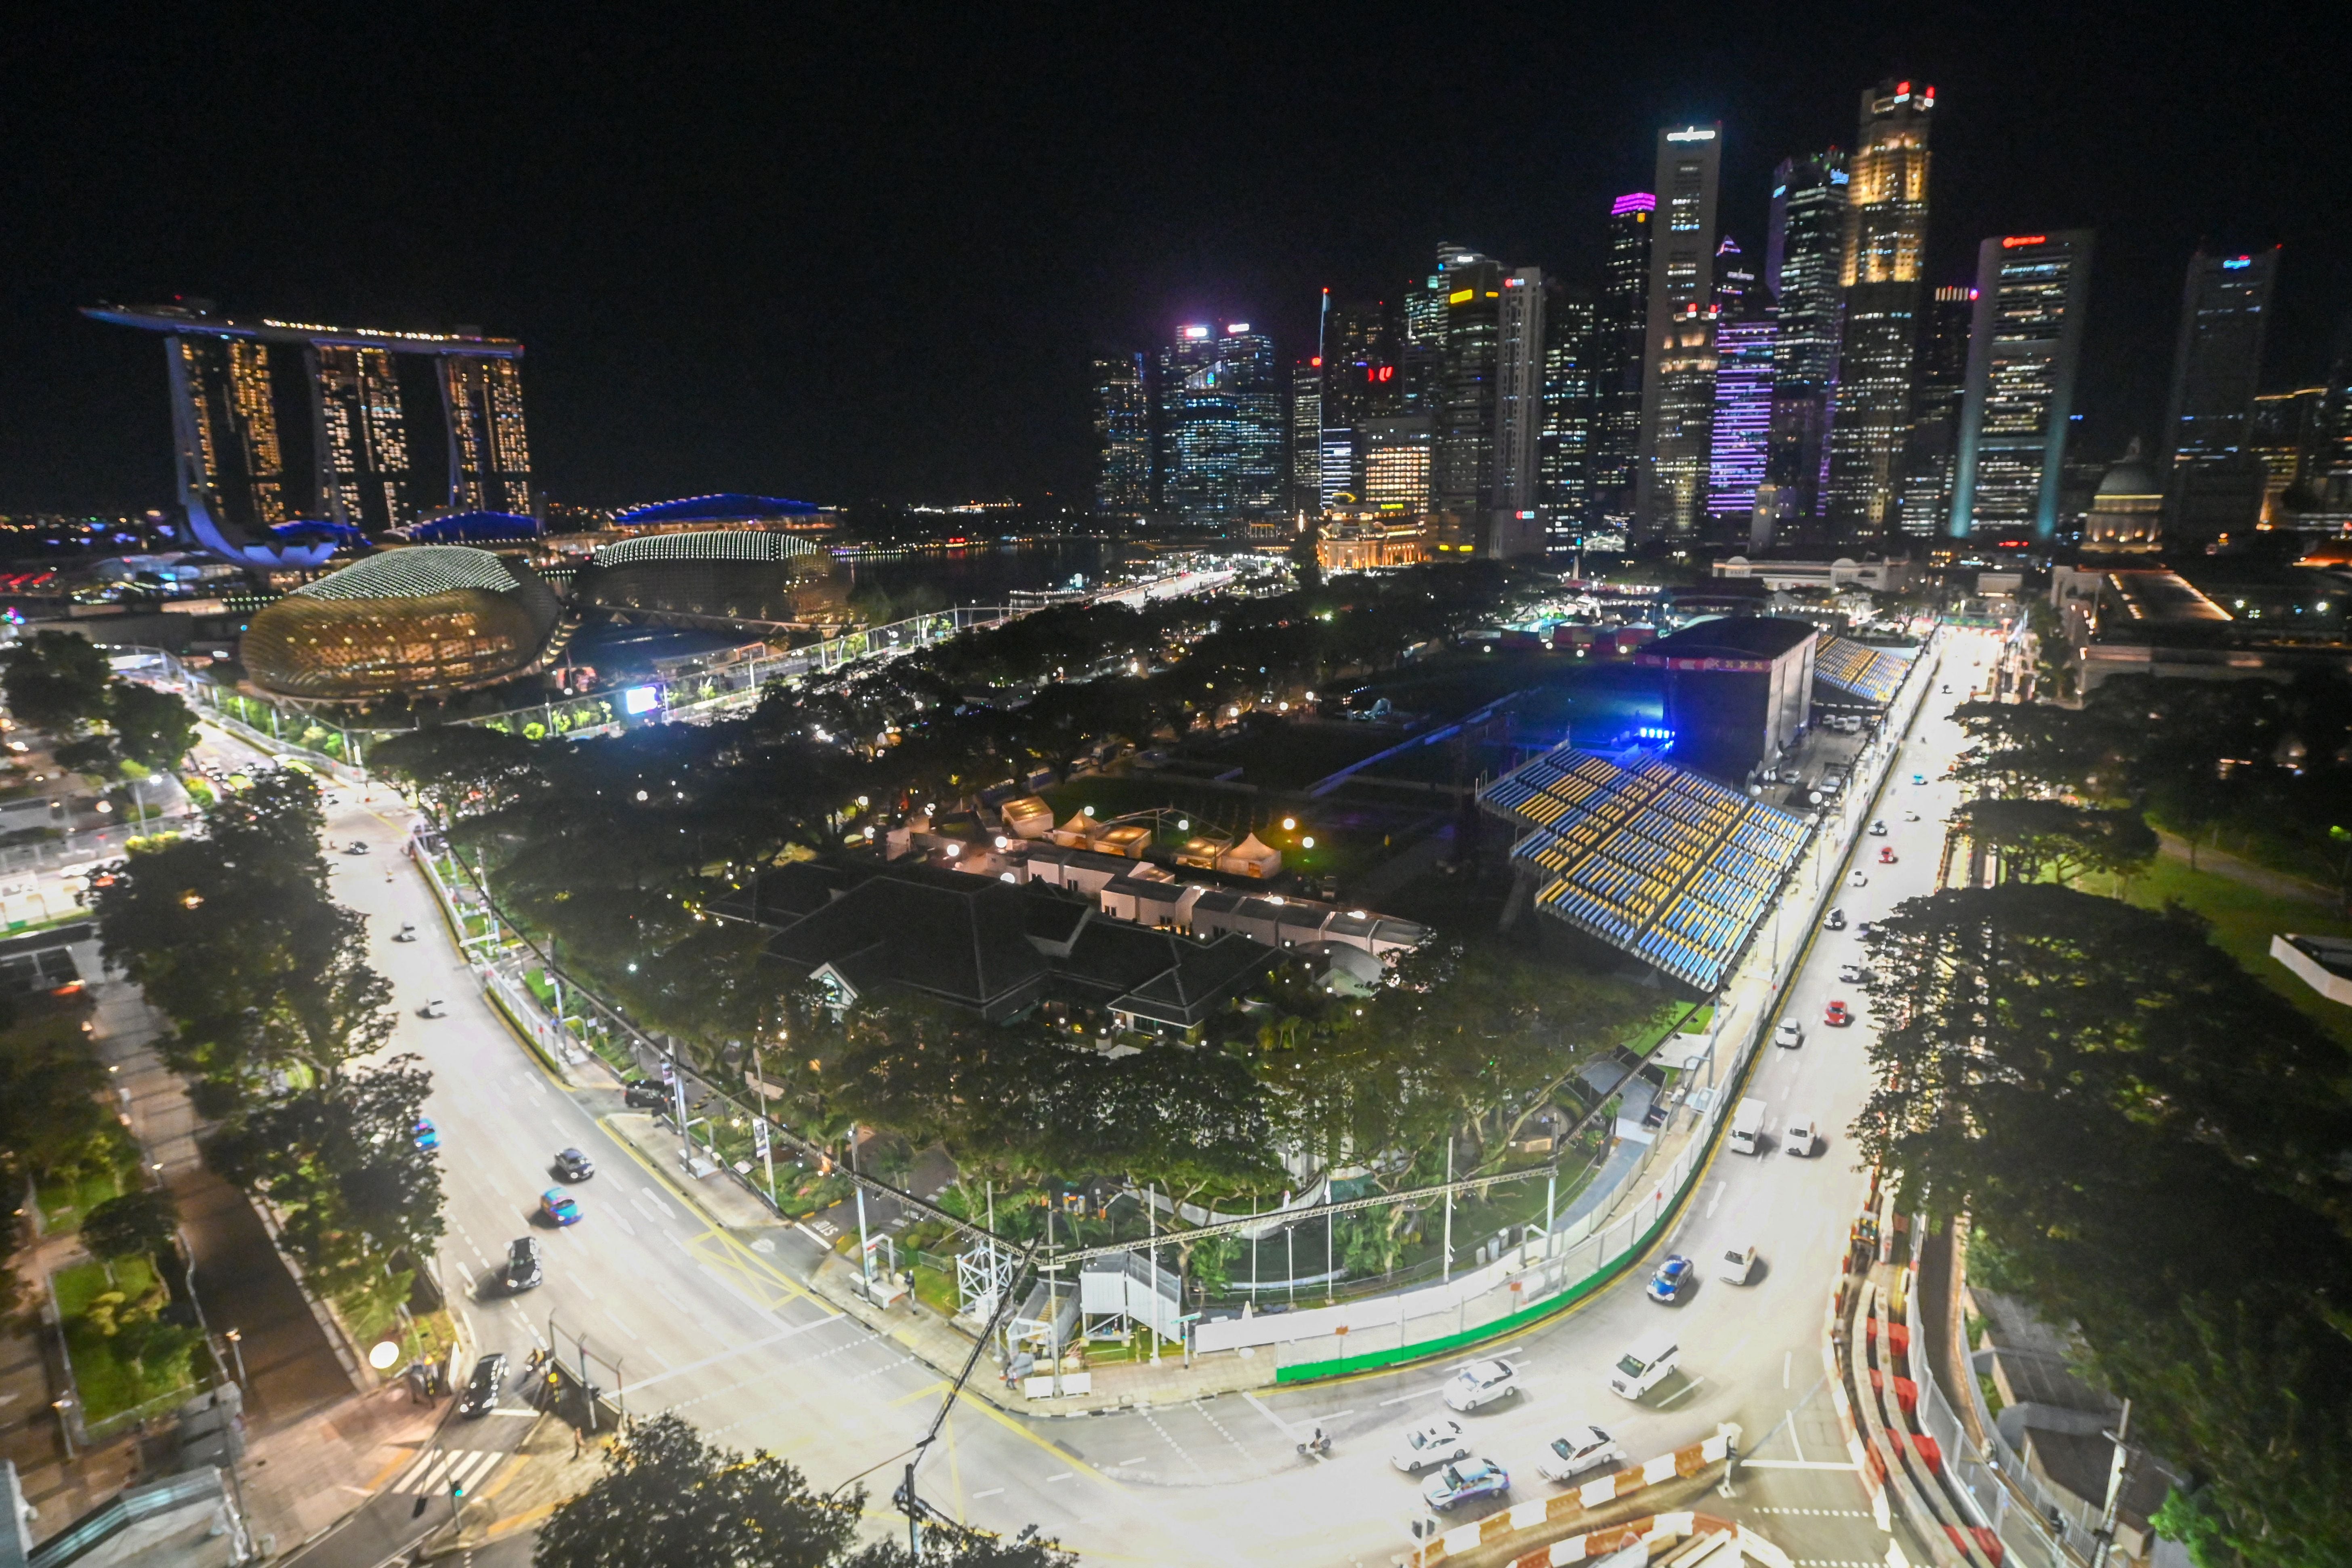 Formula 1 returns after a two-week break to the Marina Bay street circuit for the Singapore Grand Prix this weekend